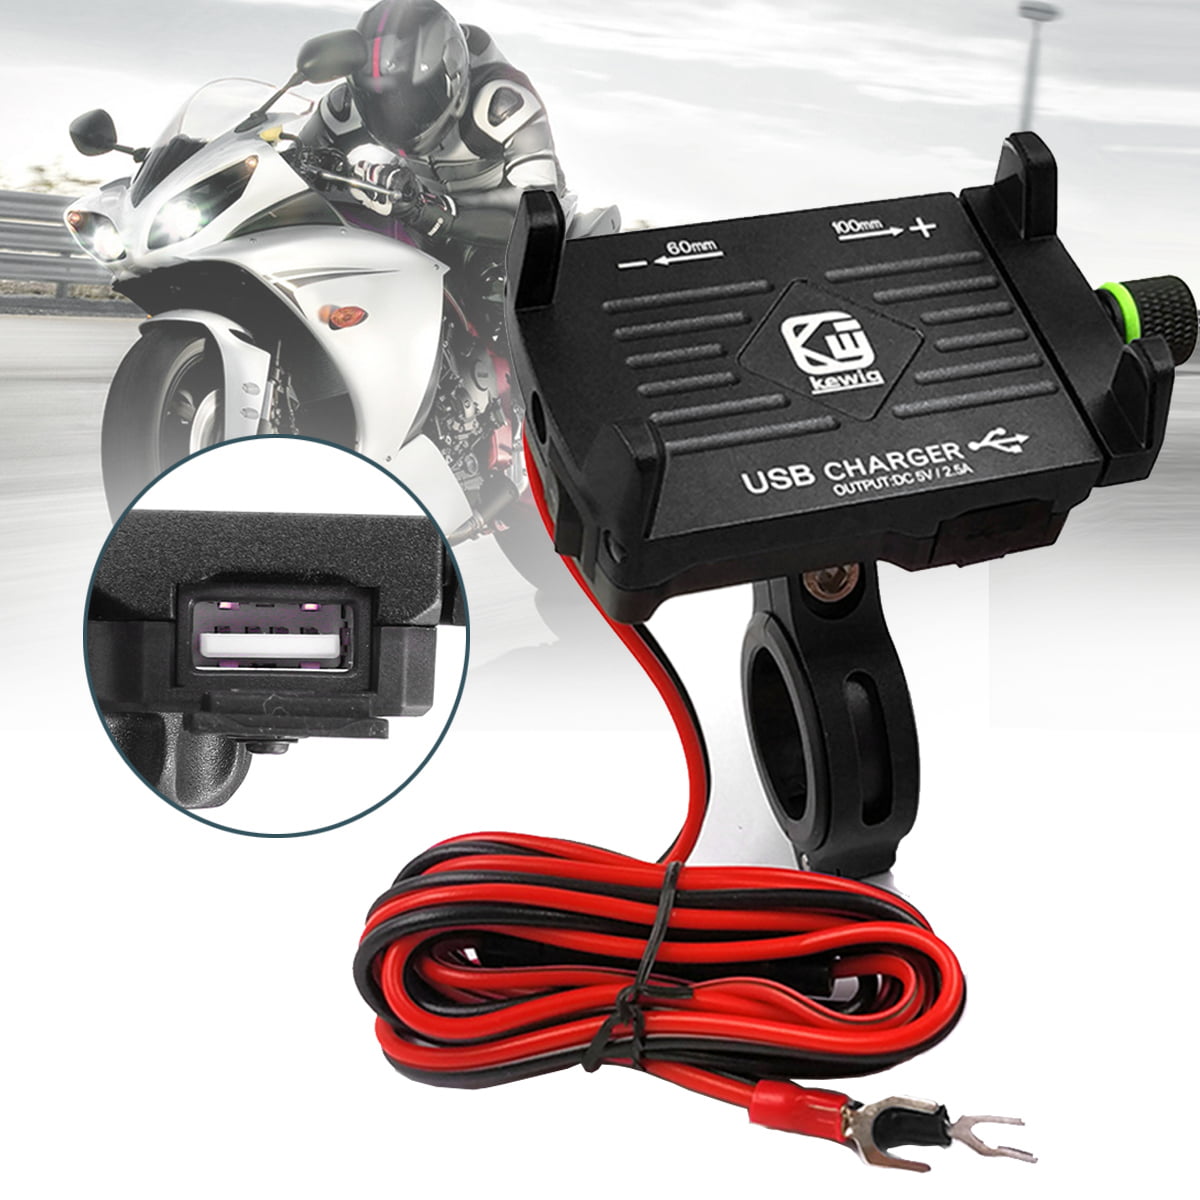 Universal Motorcycle Cell Phone Mount Holder Waterproof with USB Charger 360° Rotation for iPhone Samsung 